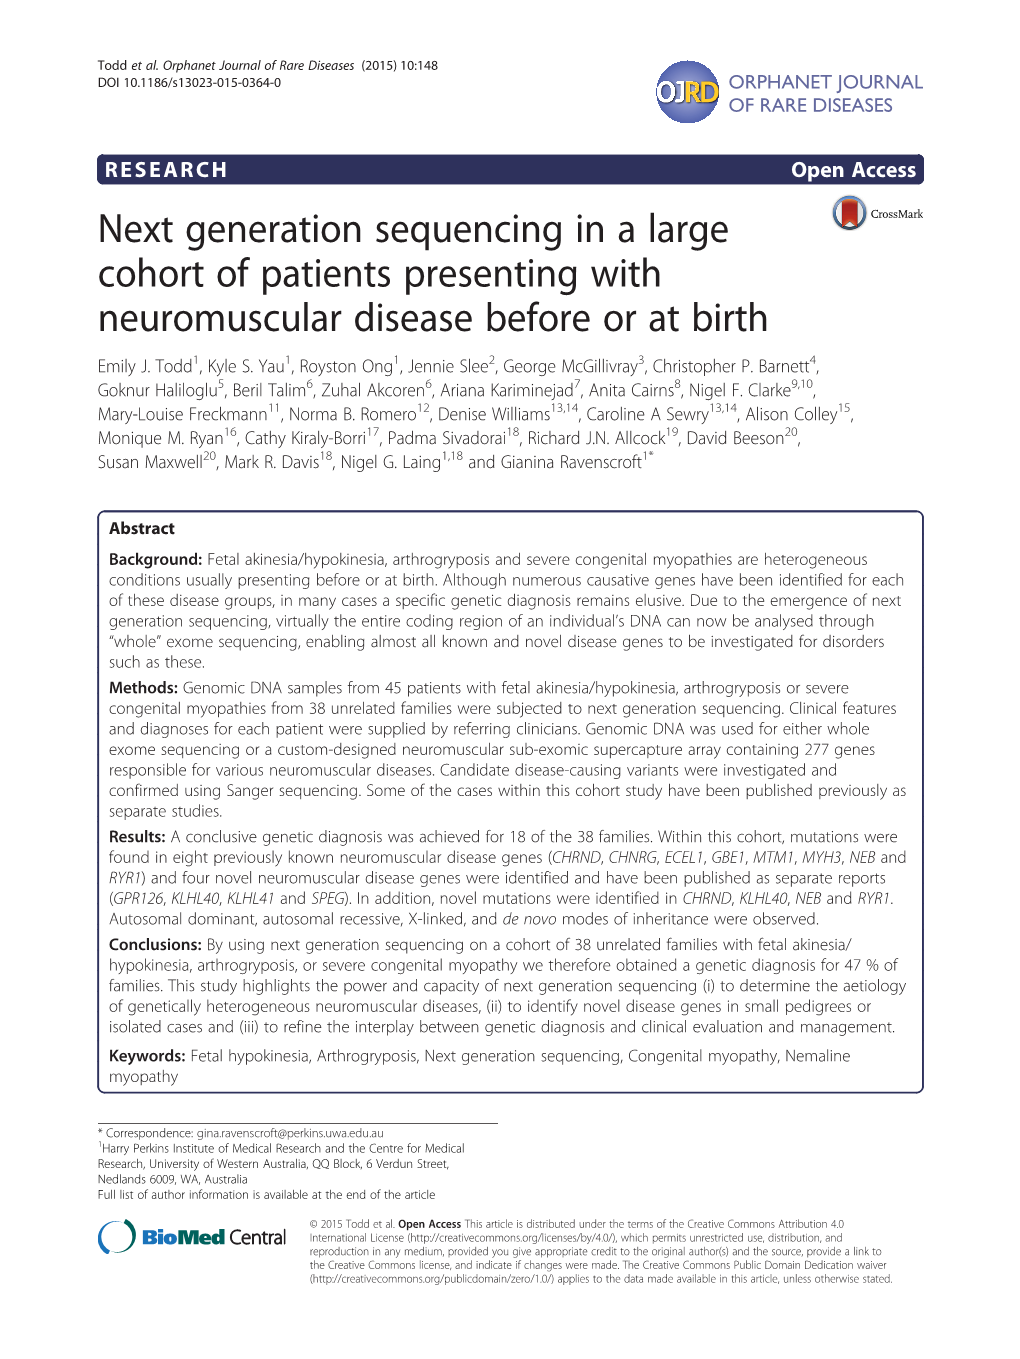 Next Generation Sequencing in a Large Cohort of Patients Presenting with Neuromuscular Disease Before Or at Birth Emily J